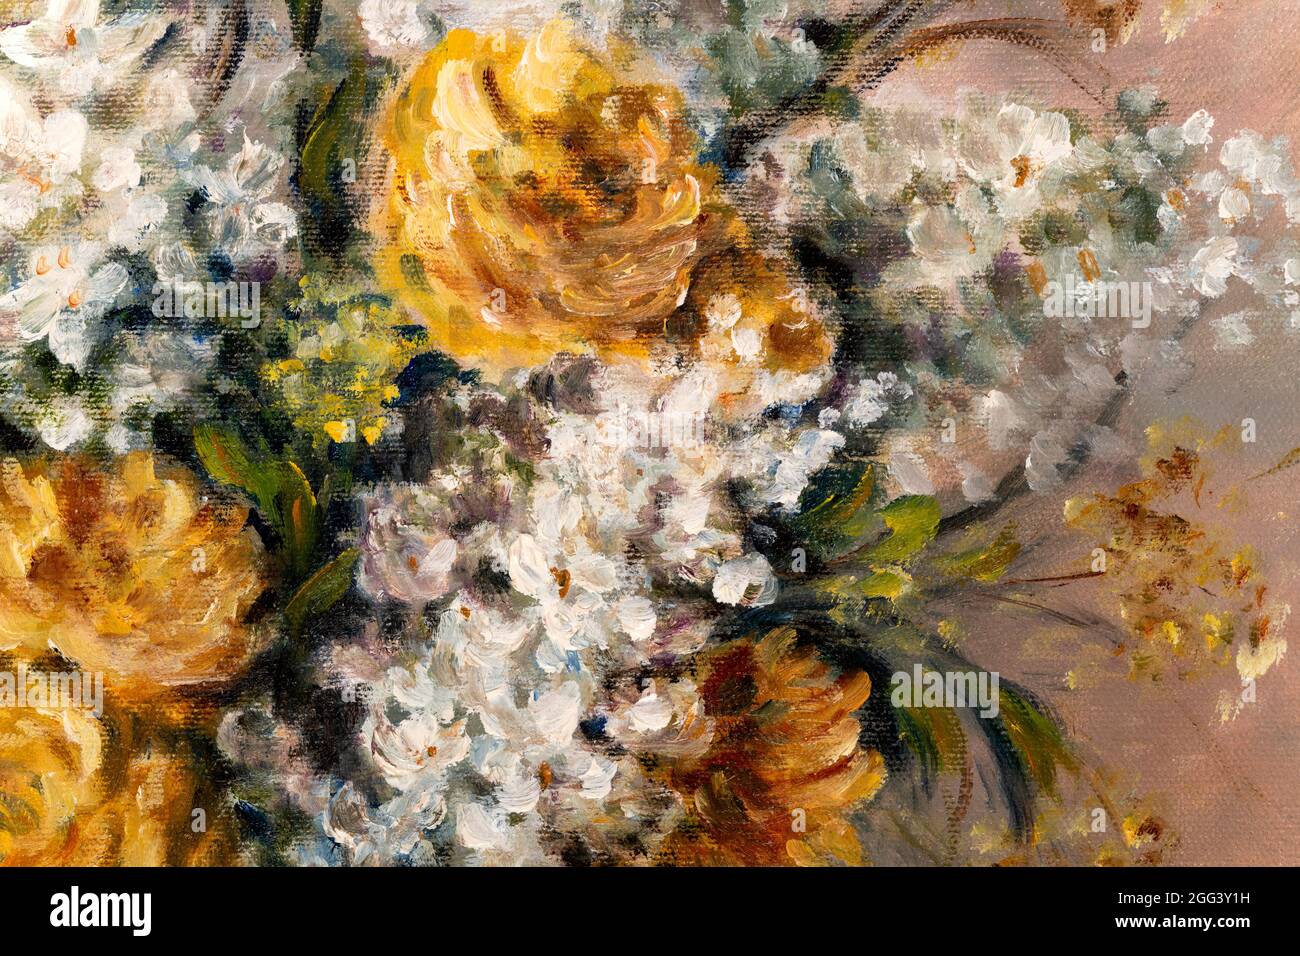 Fragment of still life oil painting depicting of orange chrysanthemum and white lilacs flowers in vase. Stock Photo